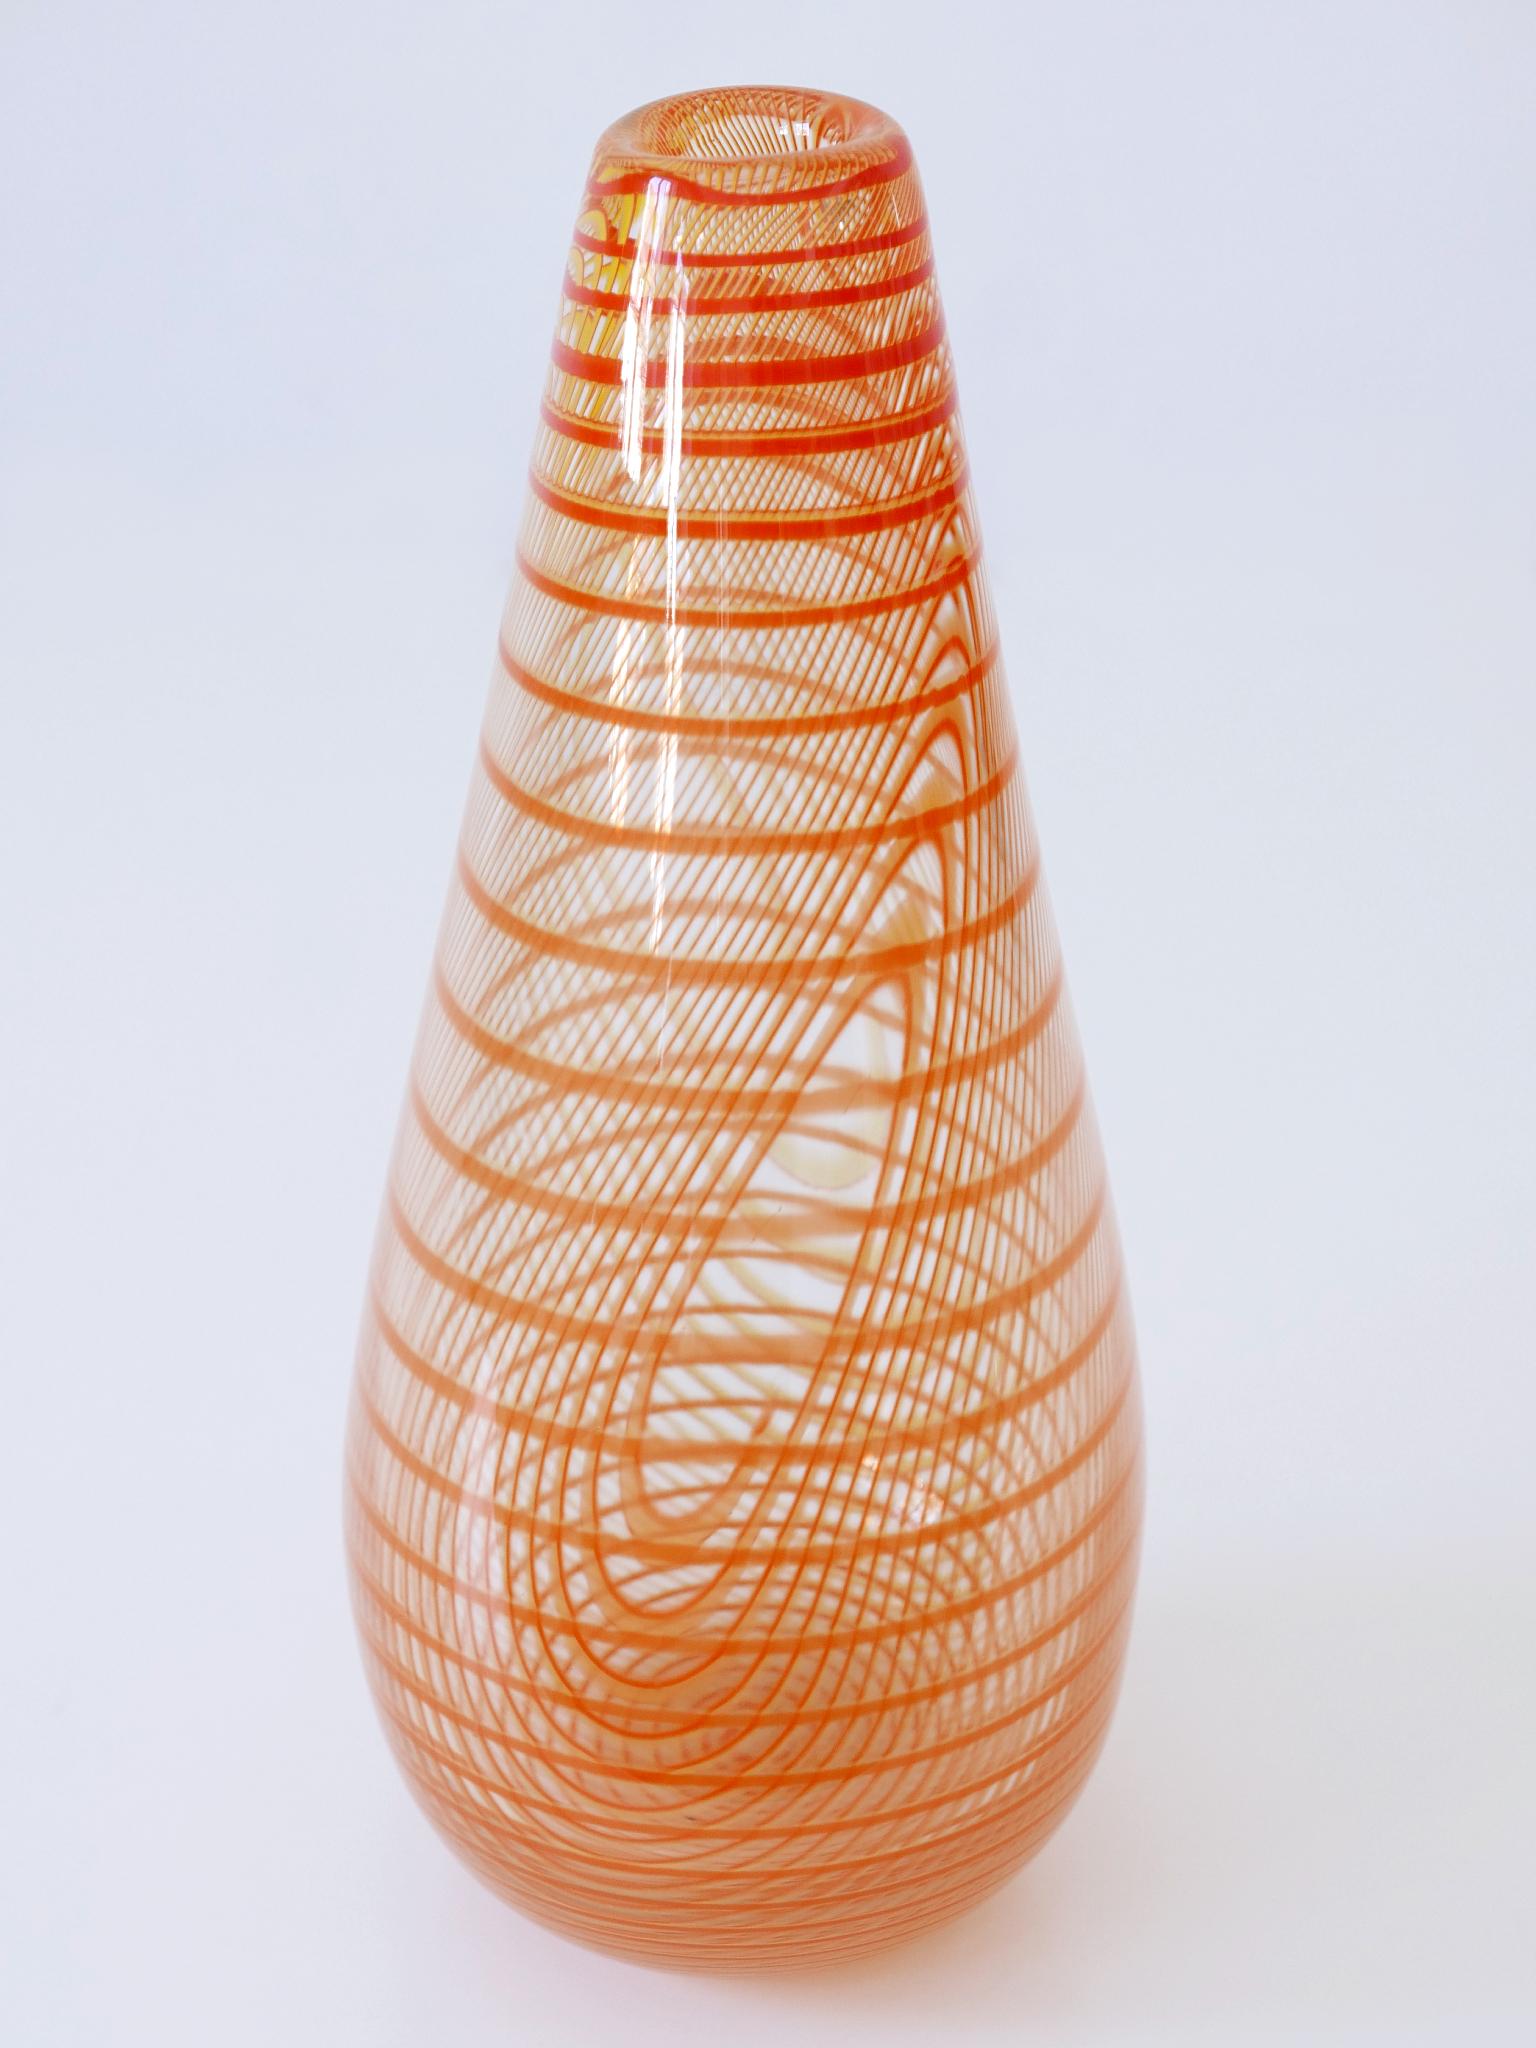 Signed & Limited Edition Art Glass Vase by Olle Brozén for Kosta Boda Sweden For Sale 5